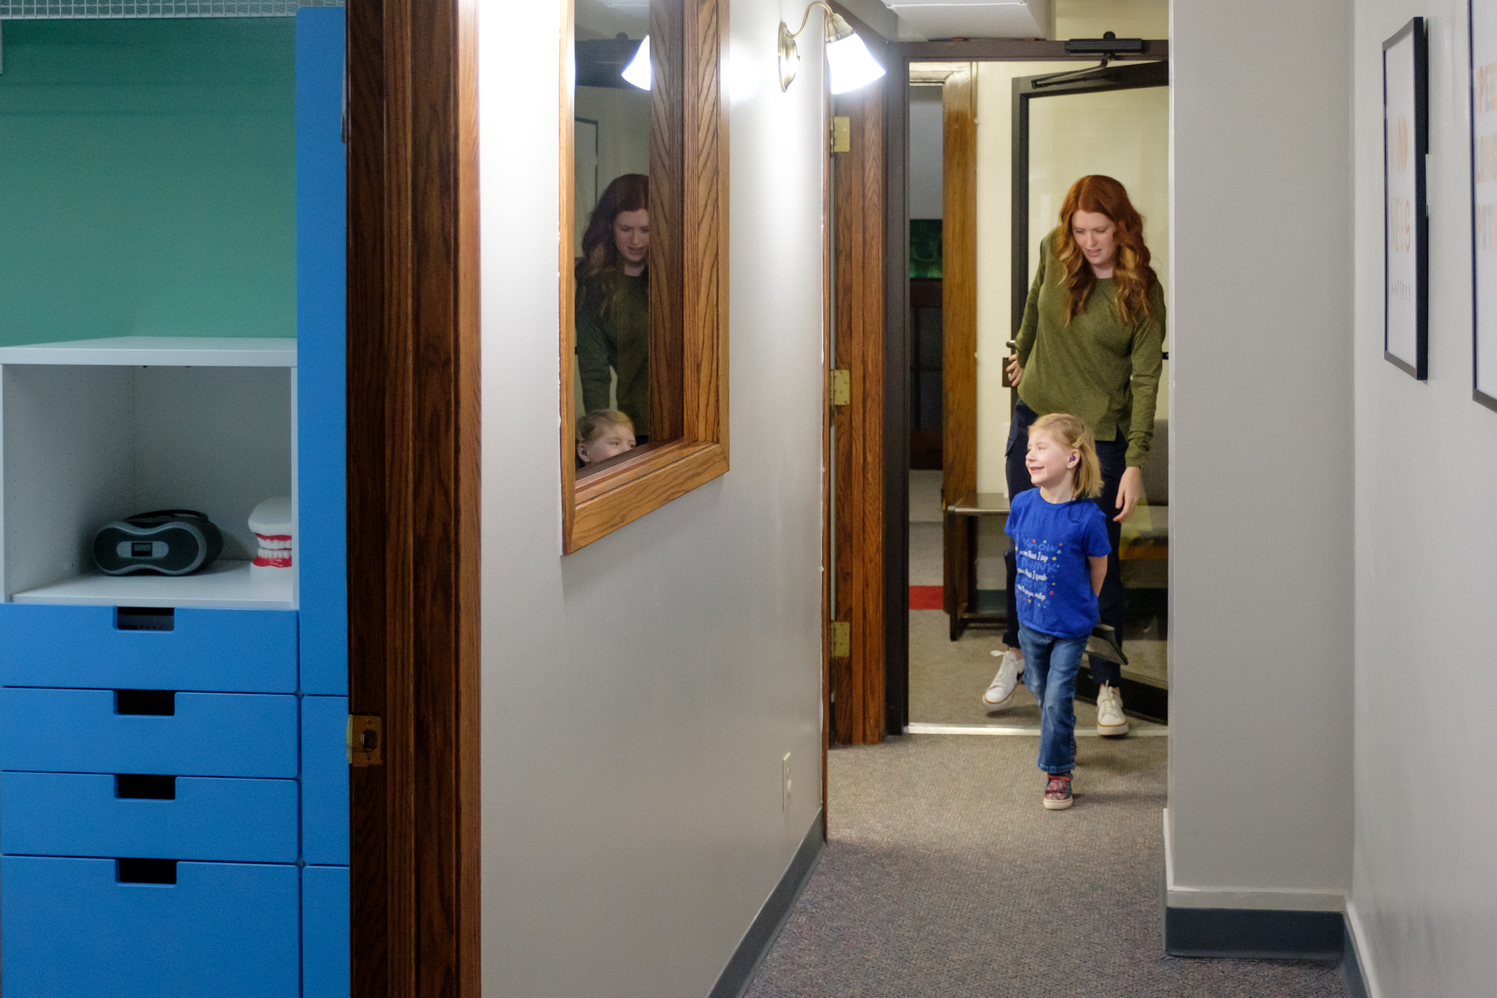 Therapist and young client walk down a hallway to their therapy room.